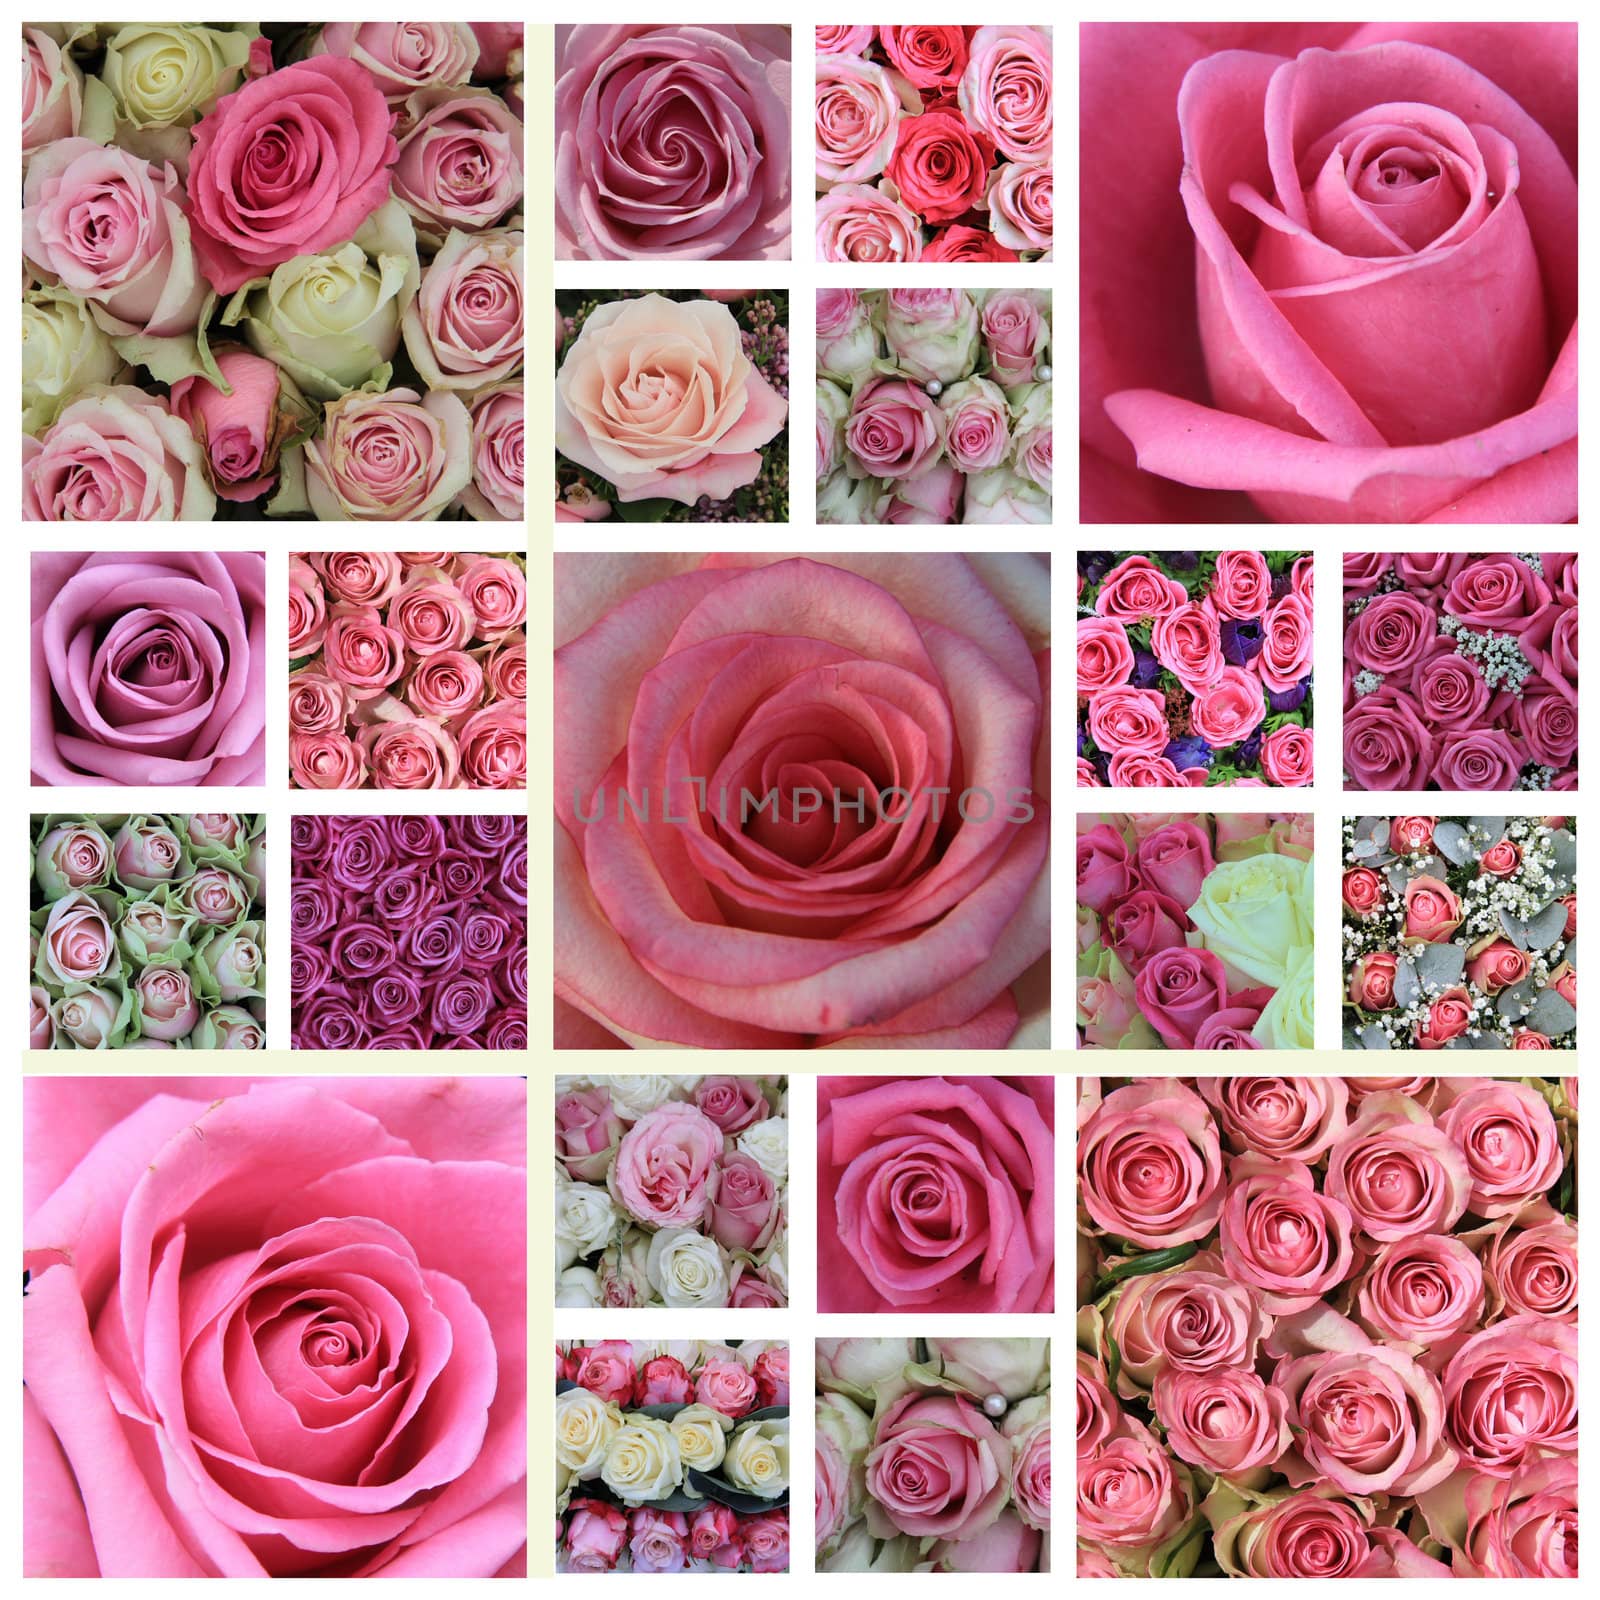 21 different pink rose images in a high resolution collage